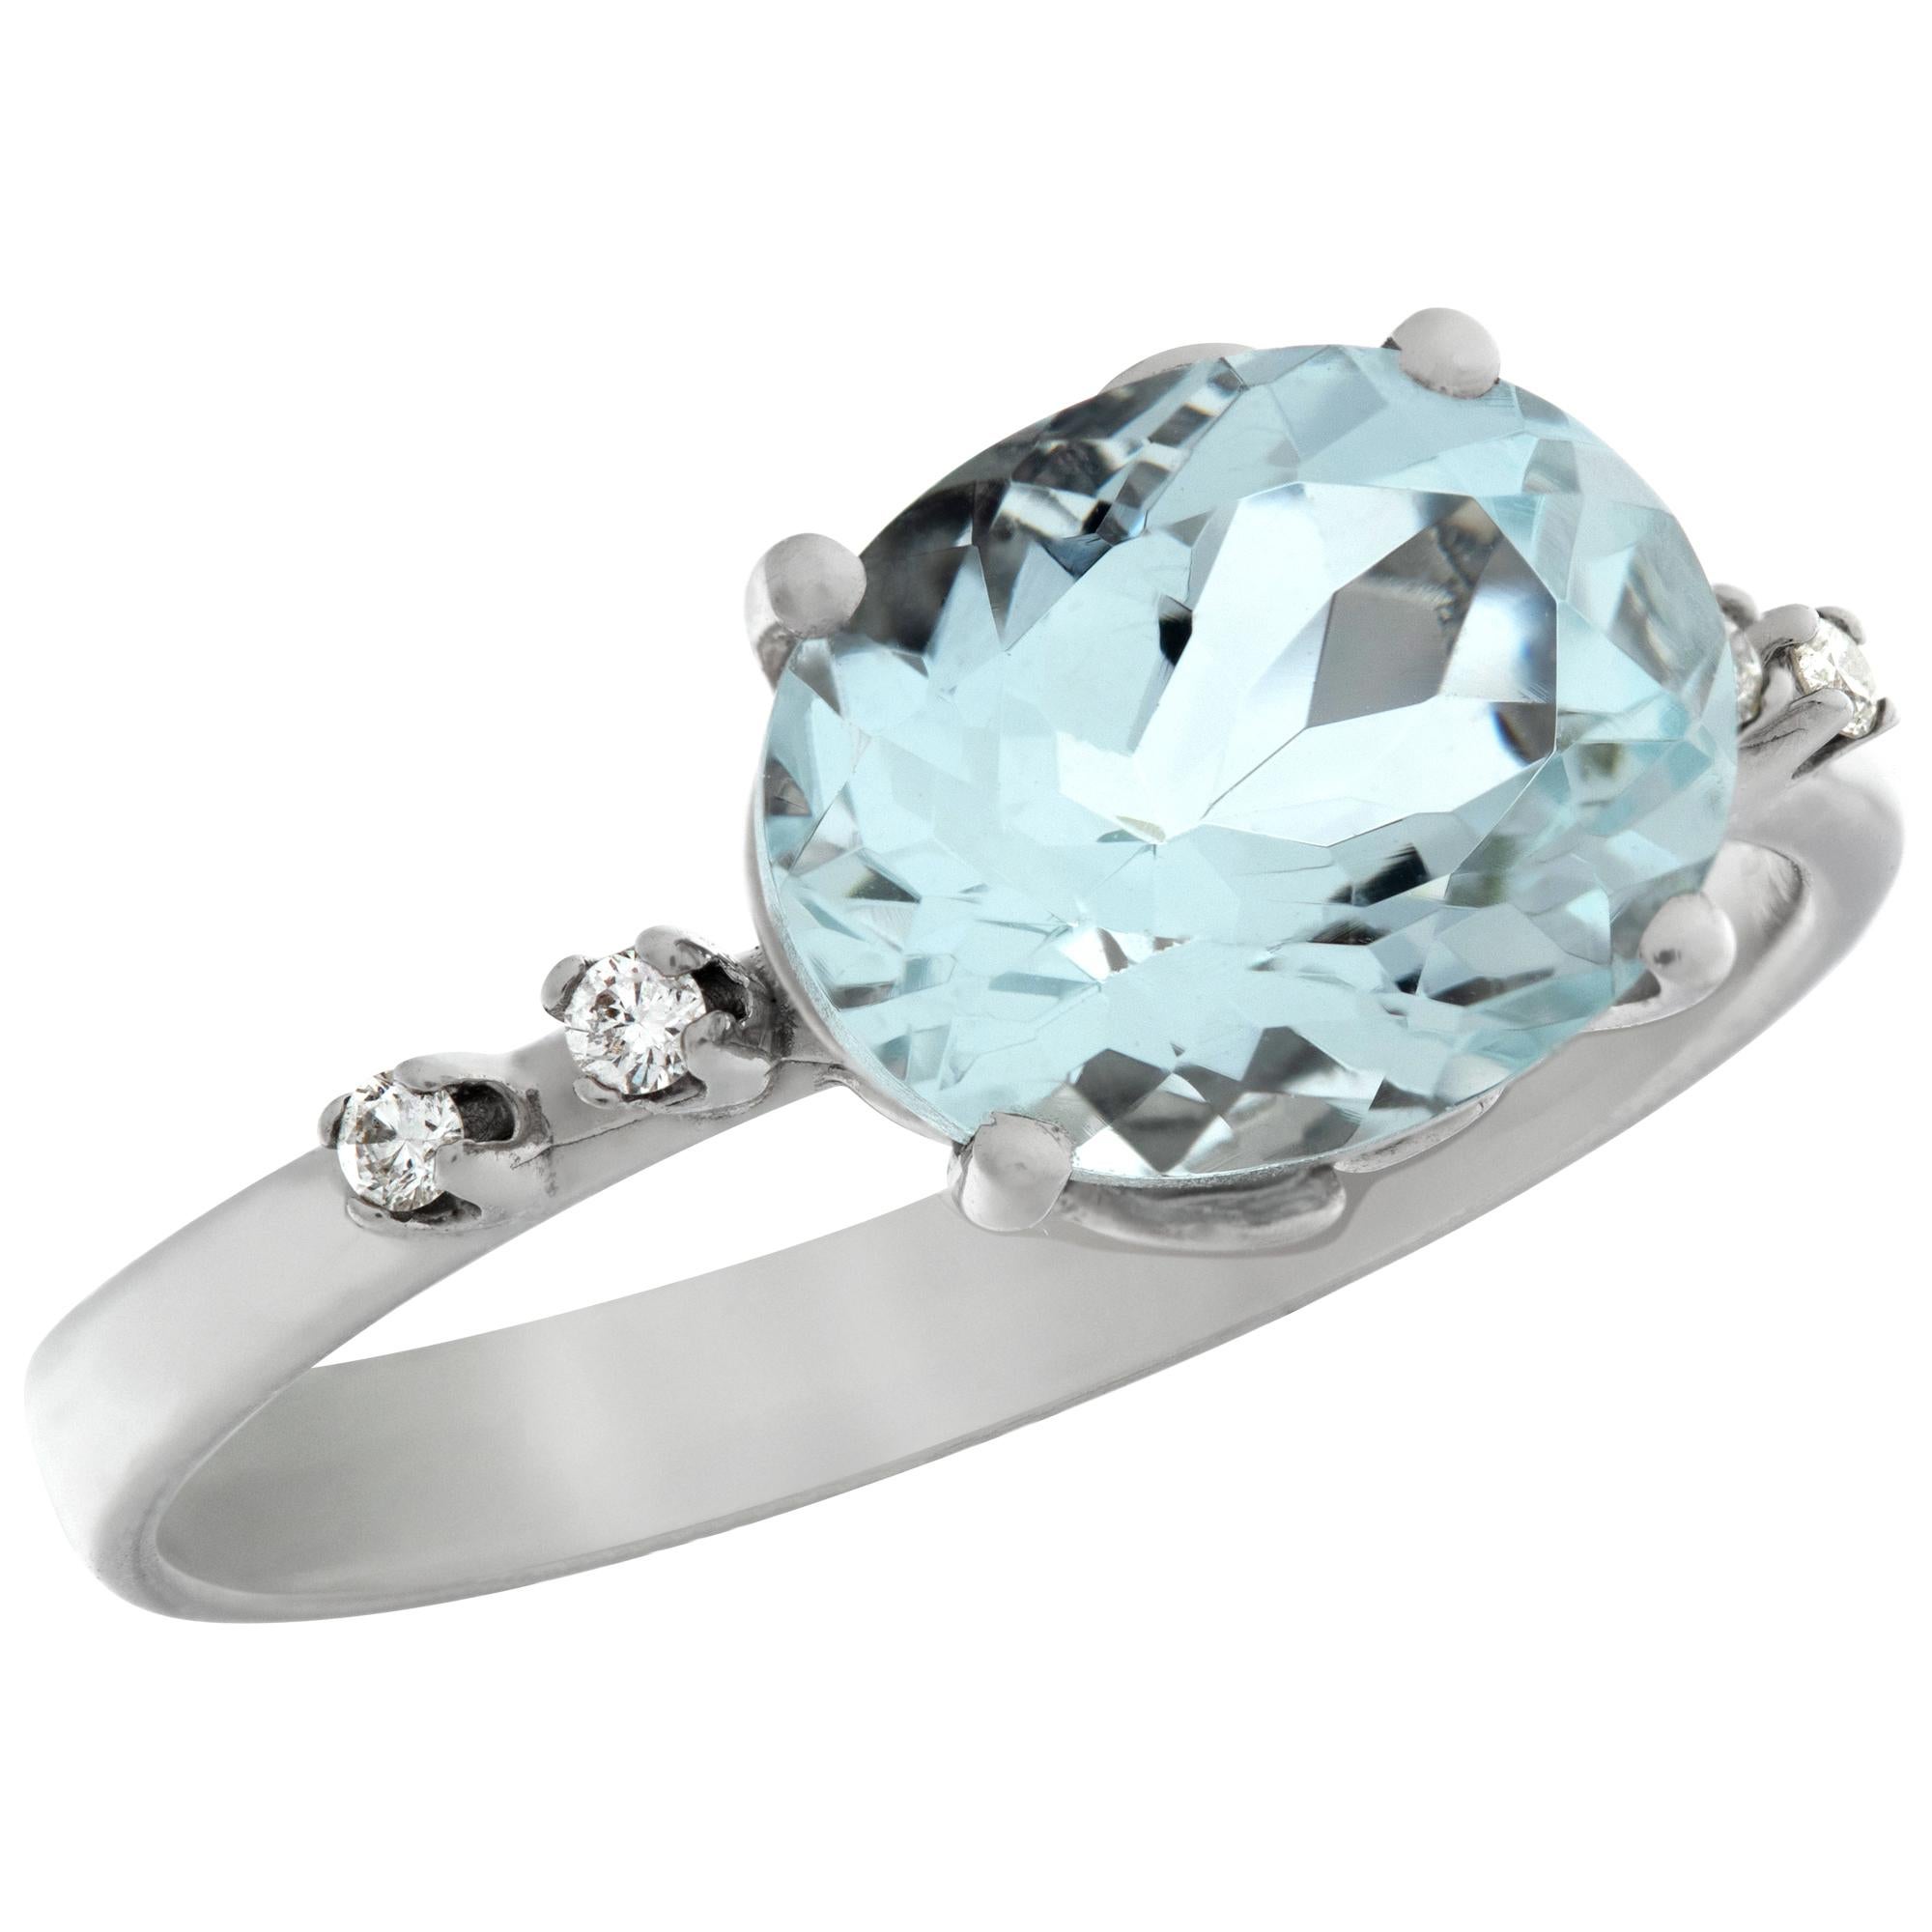 Beautiful 1.90 carat oval cut Aquamarine in an 18k white gold setting with 0.04 carat in diamonds accents. Size 7.75.This aquamarine ring is currently size 7.75 and some items can be sized up or down, please ask! It weighs 2.2 pennyweights and is